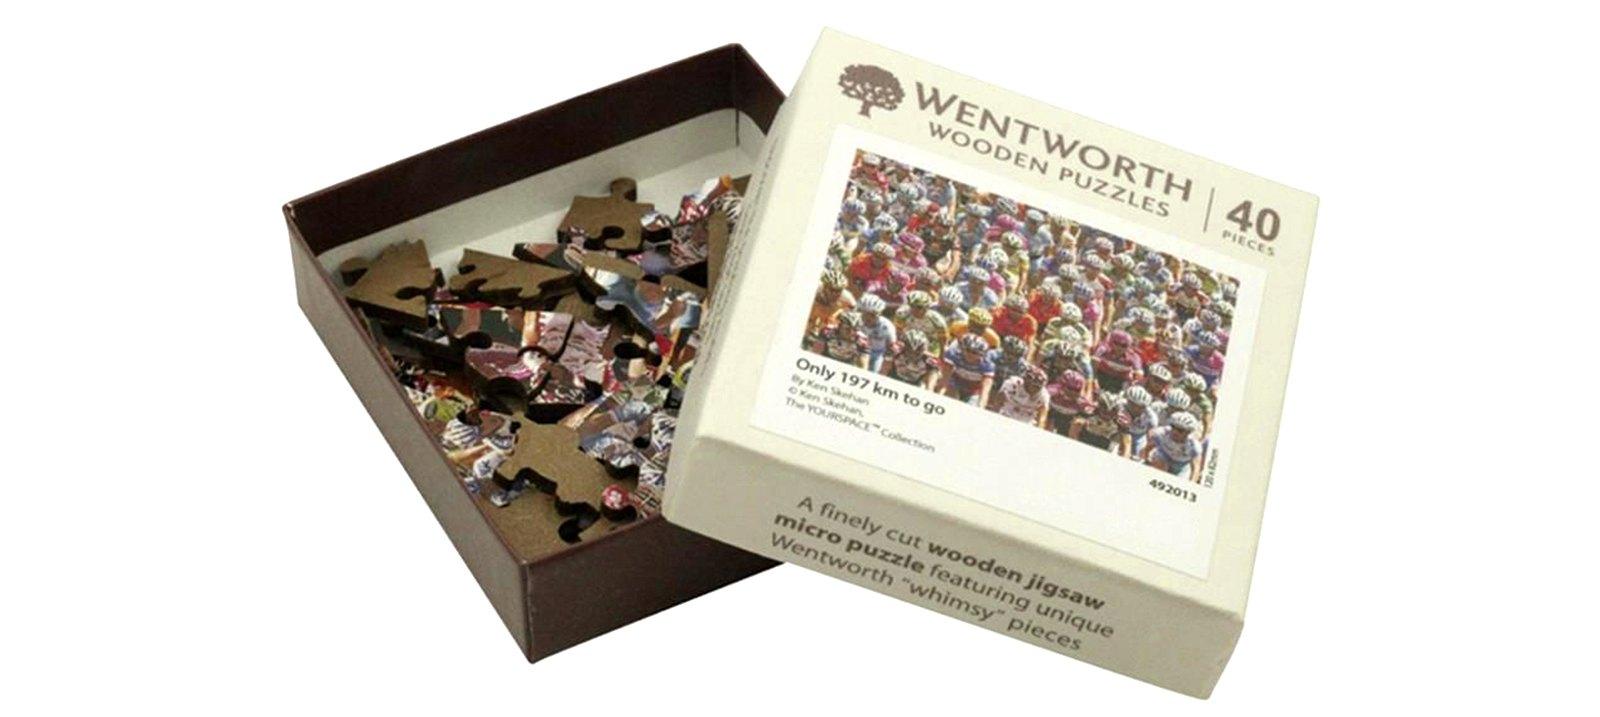 Wentworth Wooden Puzzle